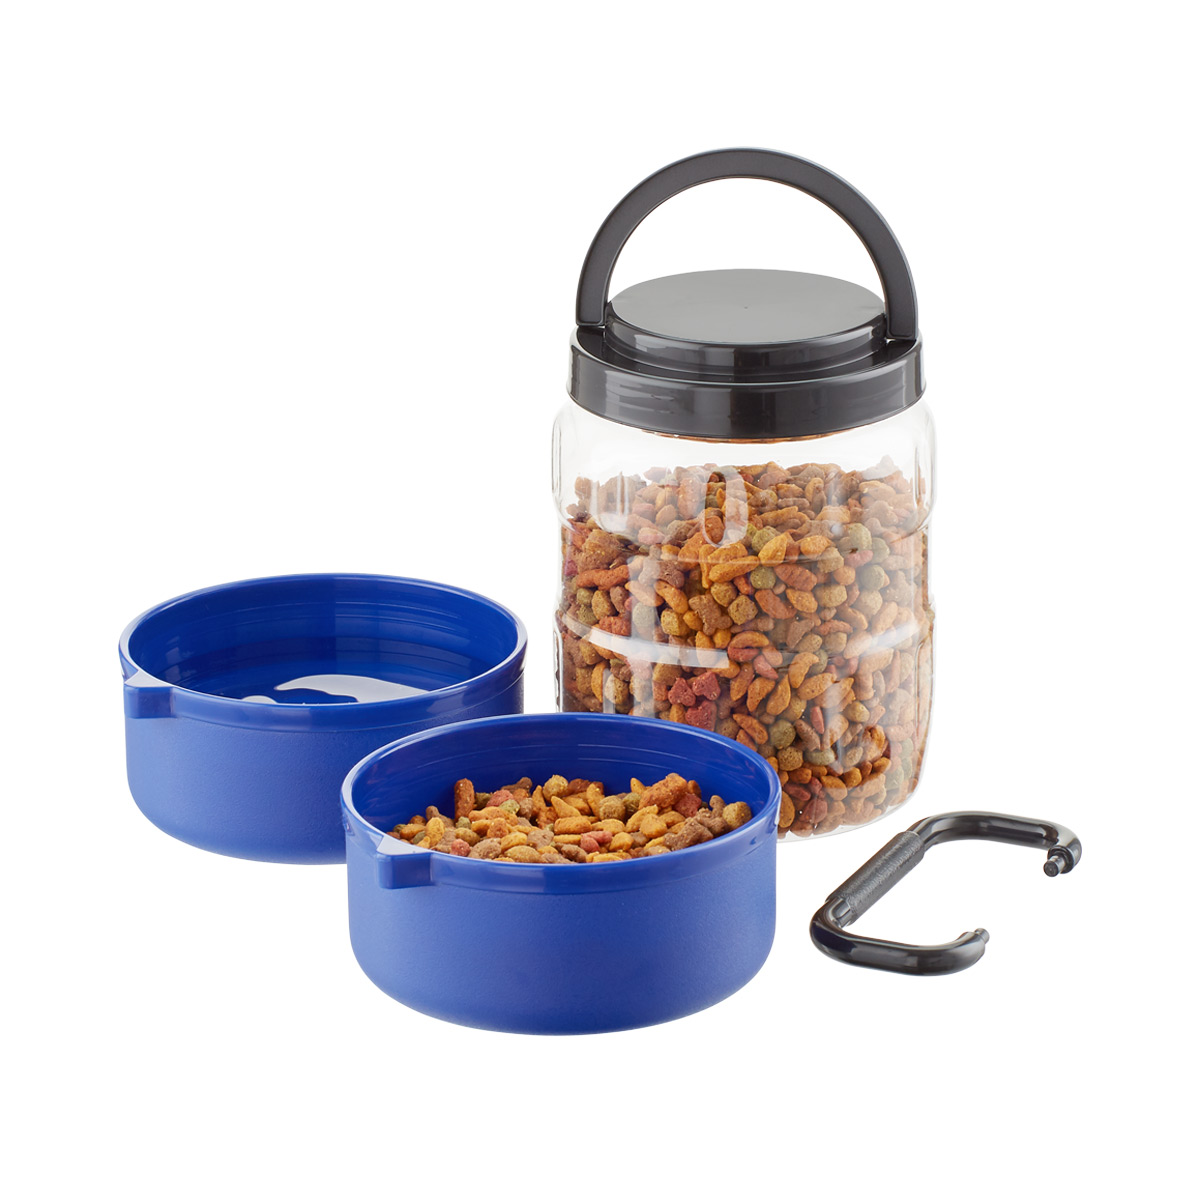 https://www.containerstore.com/catalogimages/344562/10042014-pet-food-travel-tainer.jpg